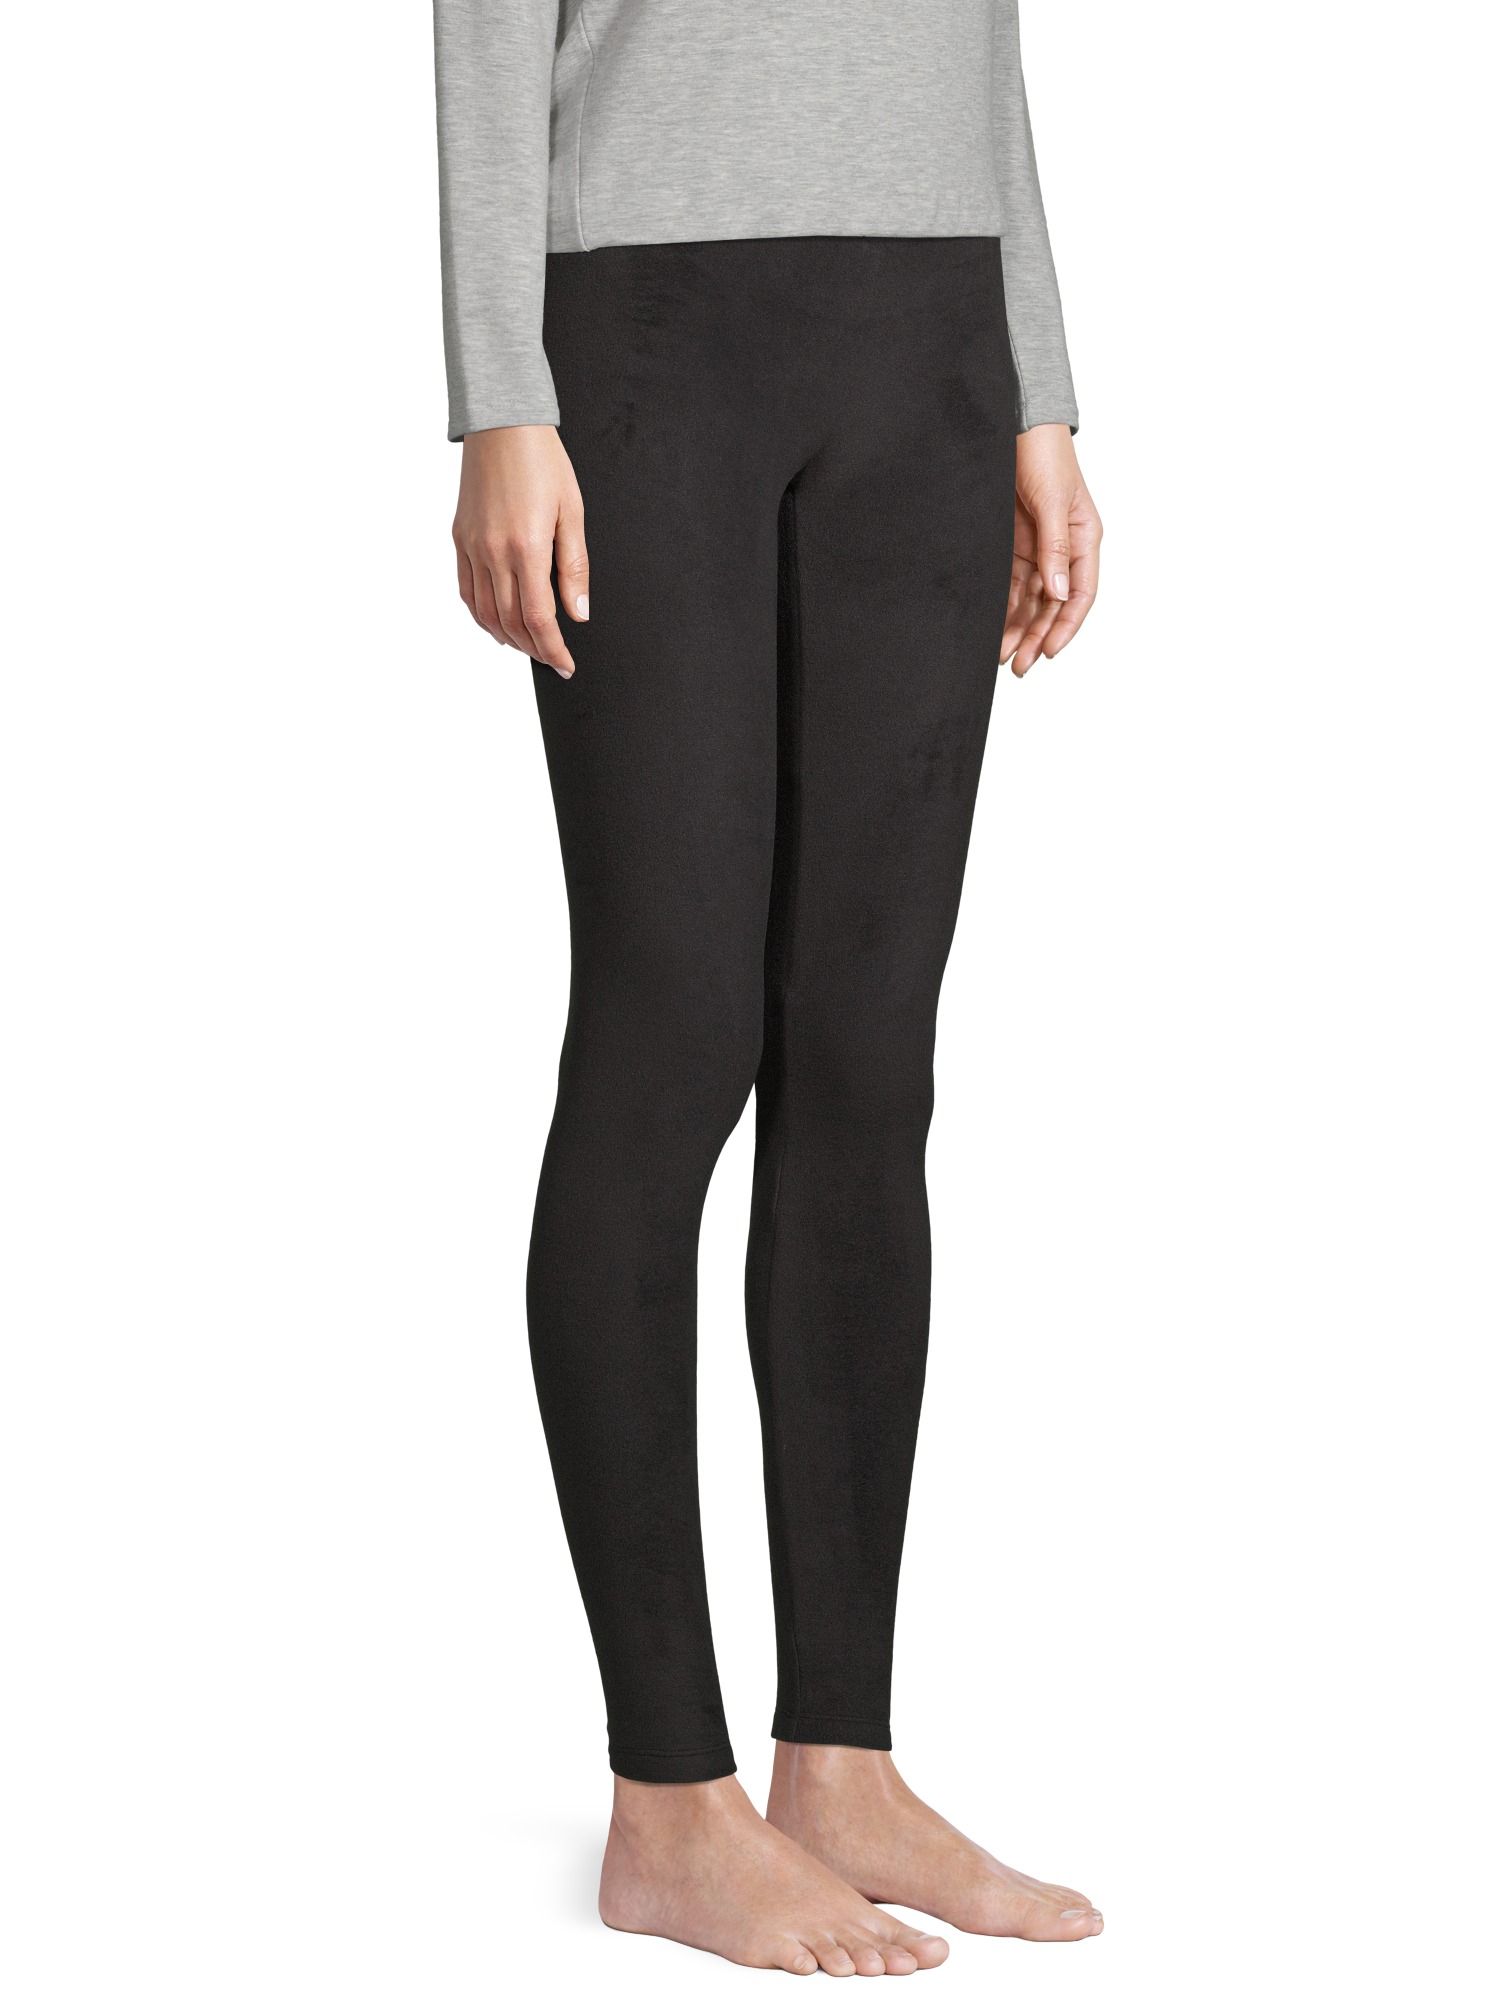 ClimateRight by Cuddl Duds Women's Stretch Fleece Base Layer Natural Rise Thermal Leggings - image 5 of 7